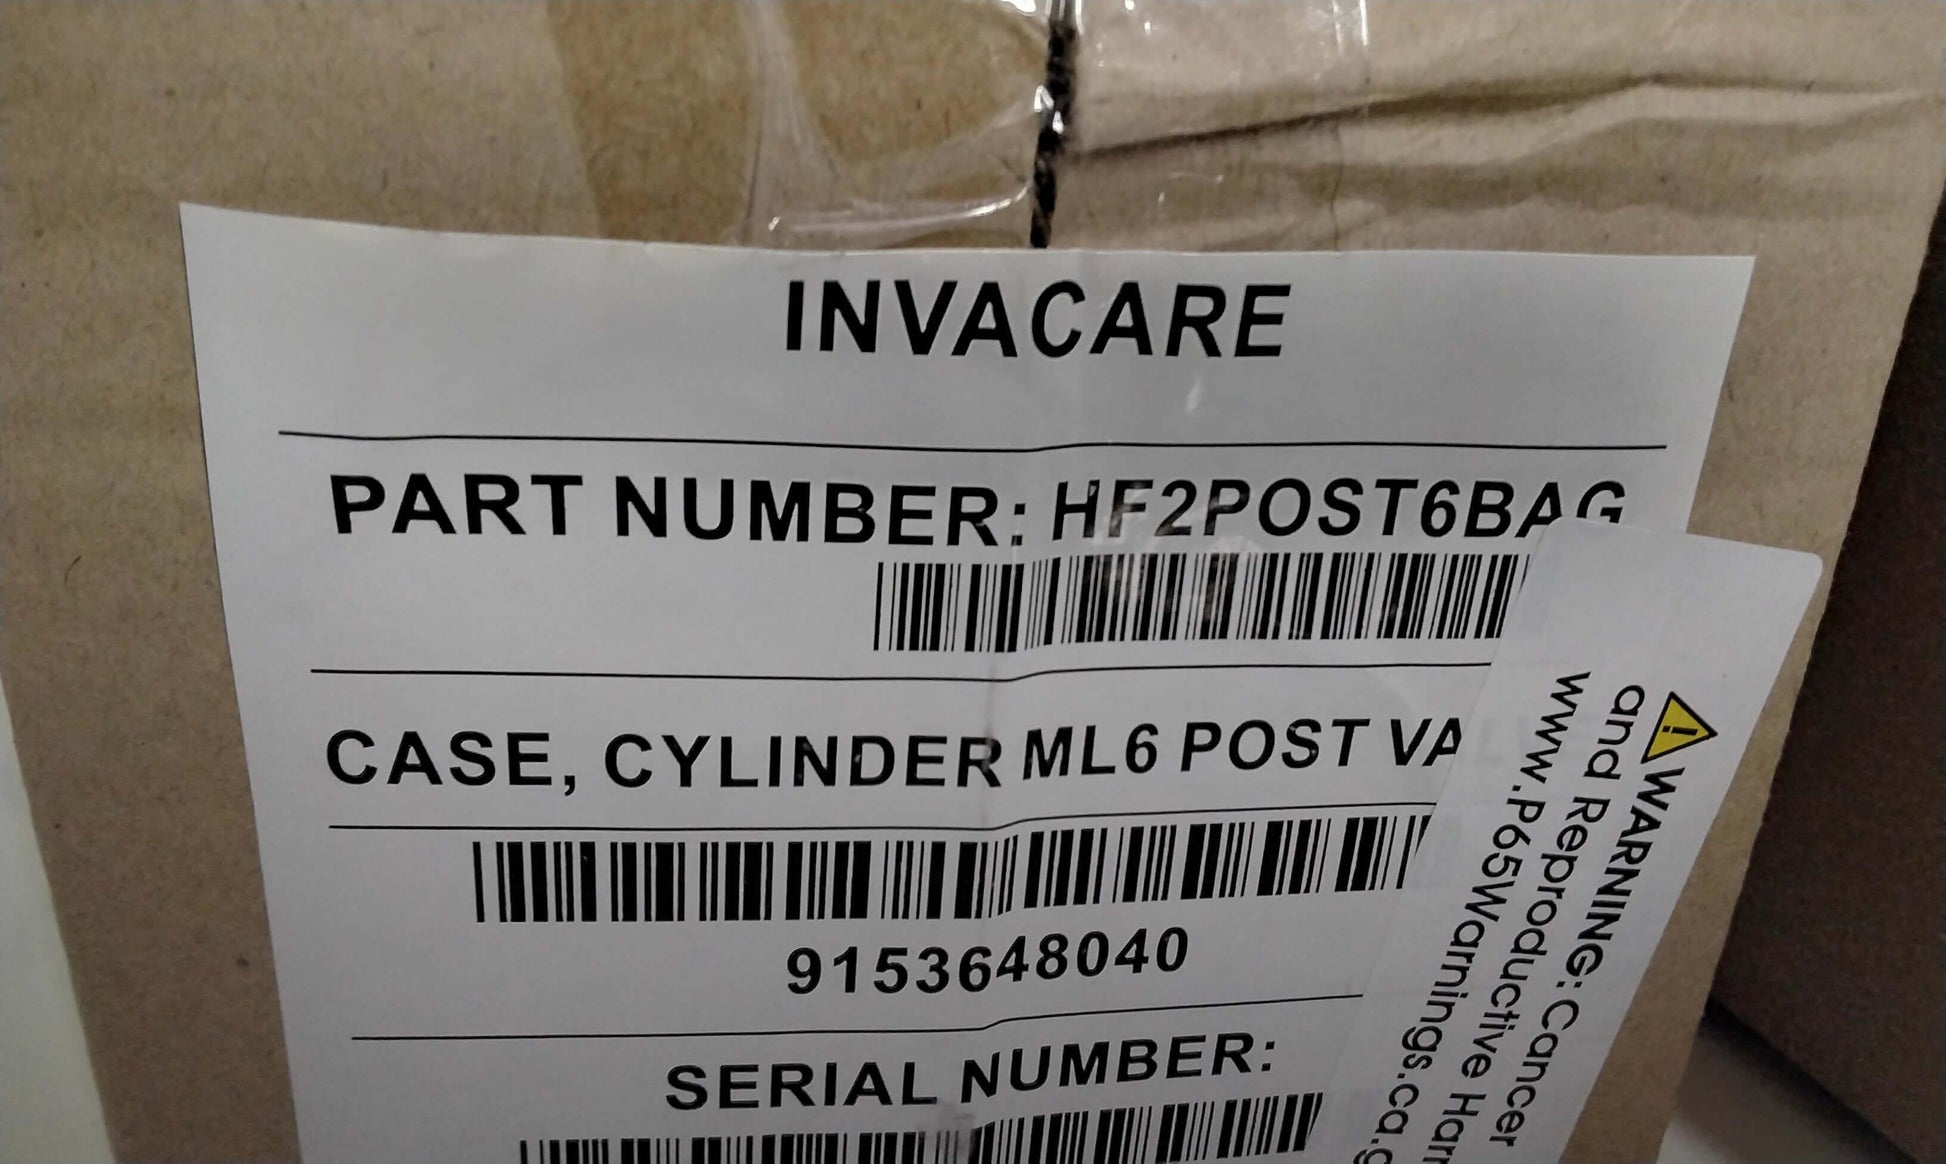 NEW Invacare ML6 Post Valve Cylinder and Carrying Bag HF2POST6KIT with Free Shipping and Warranty - MBR Medicals